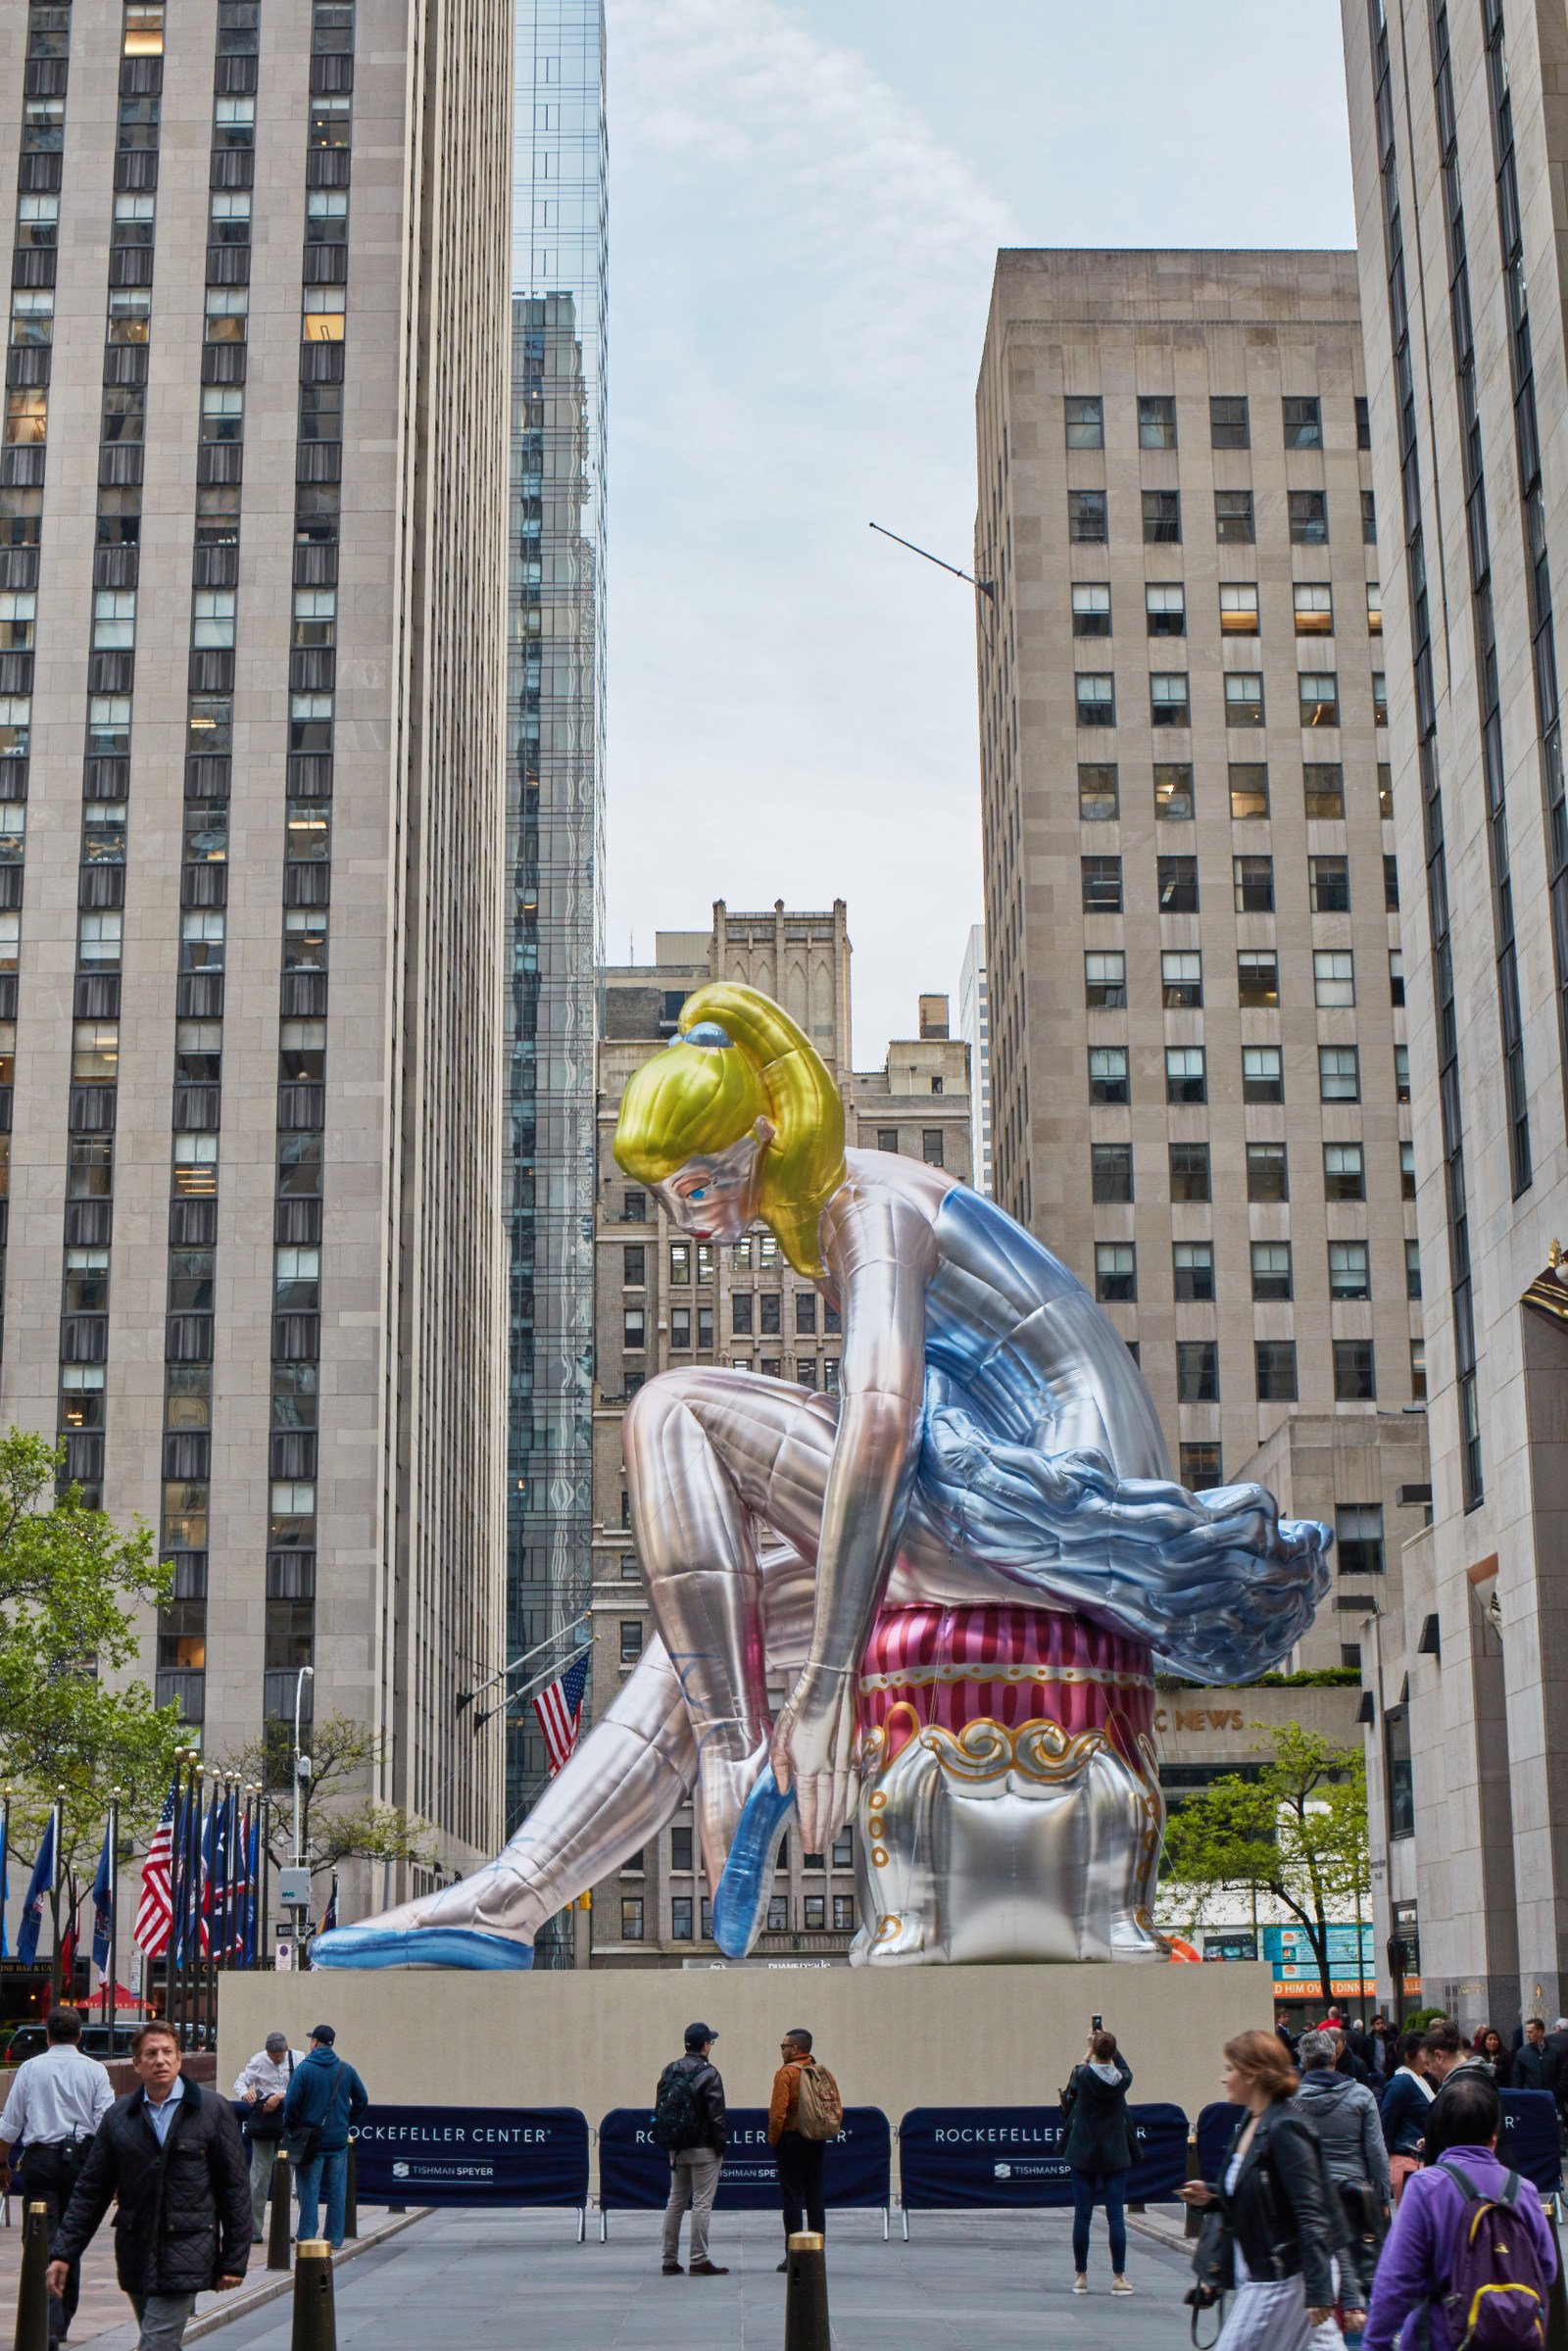 From ‘dOGUMENTA’ to ‘Seated Ballerina’ 34 Amazing Public Art Shows to